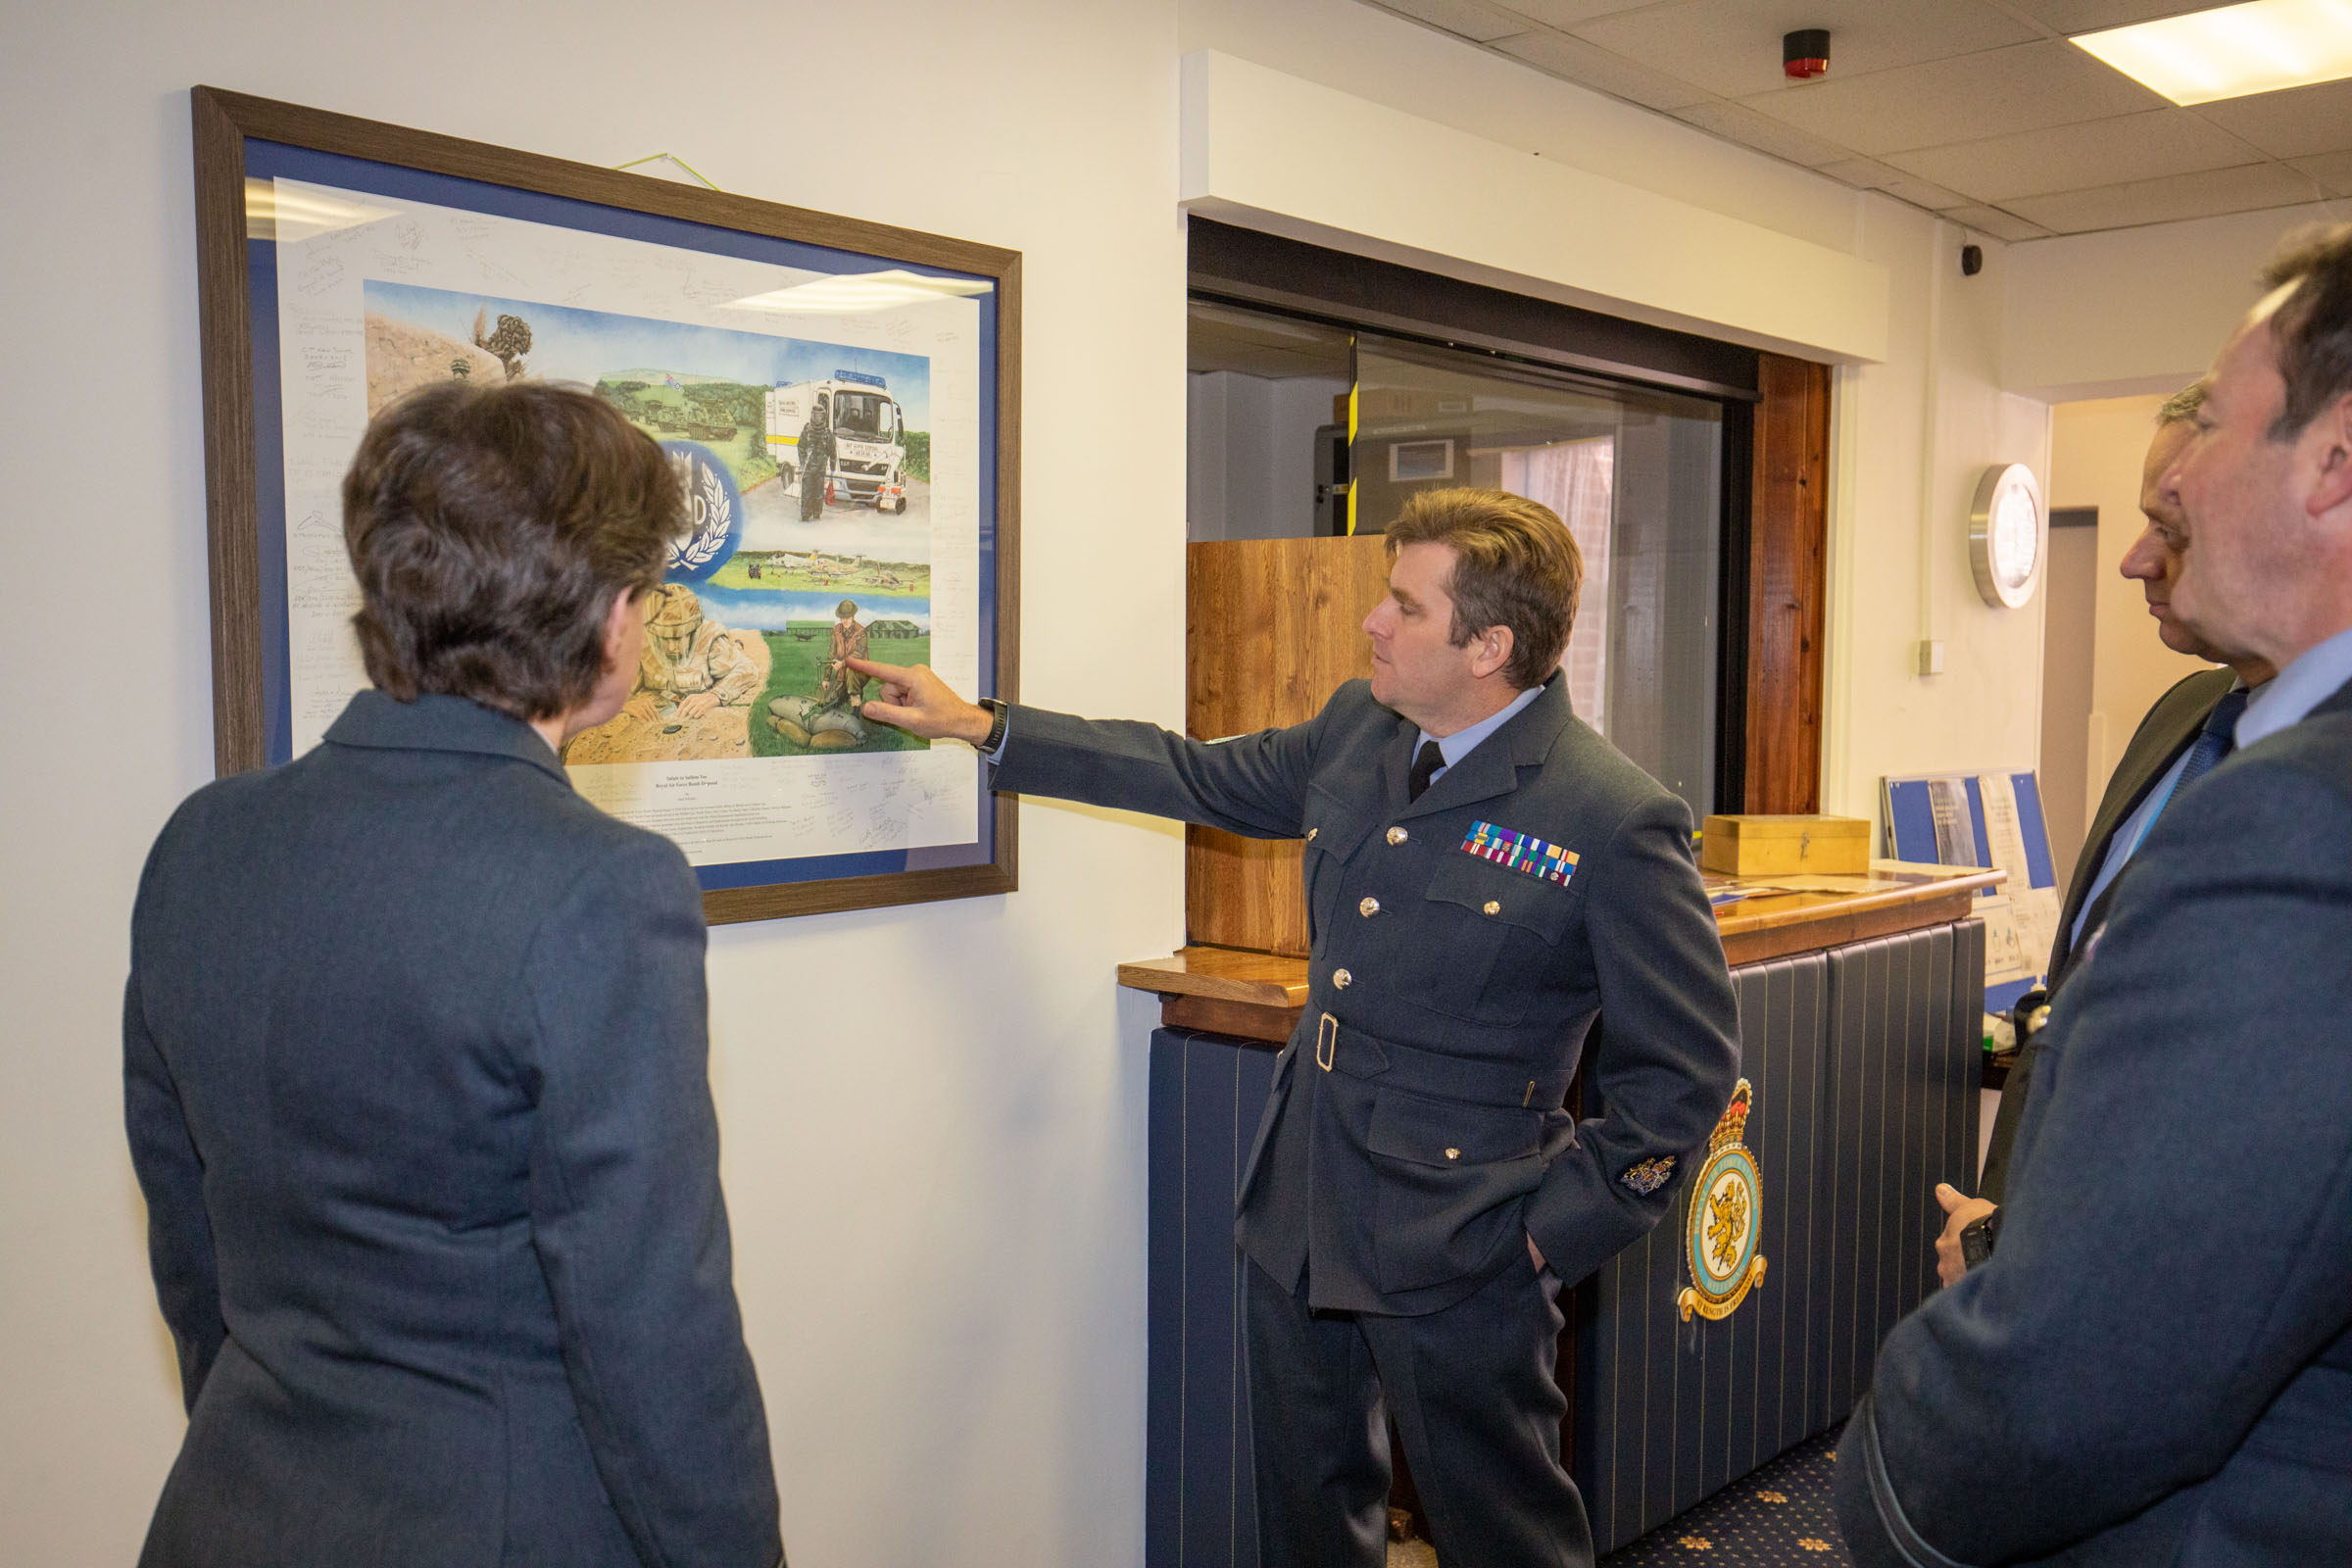 Warrant Officer Lowe explains some of the historical details in the painting